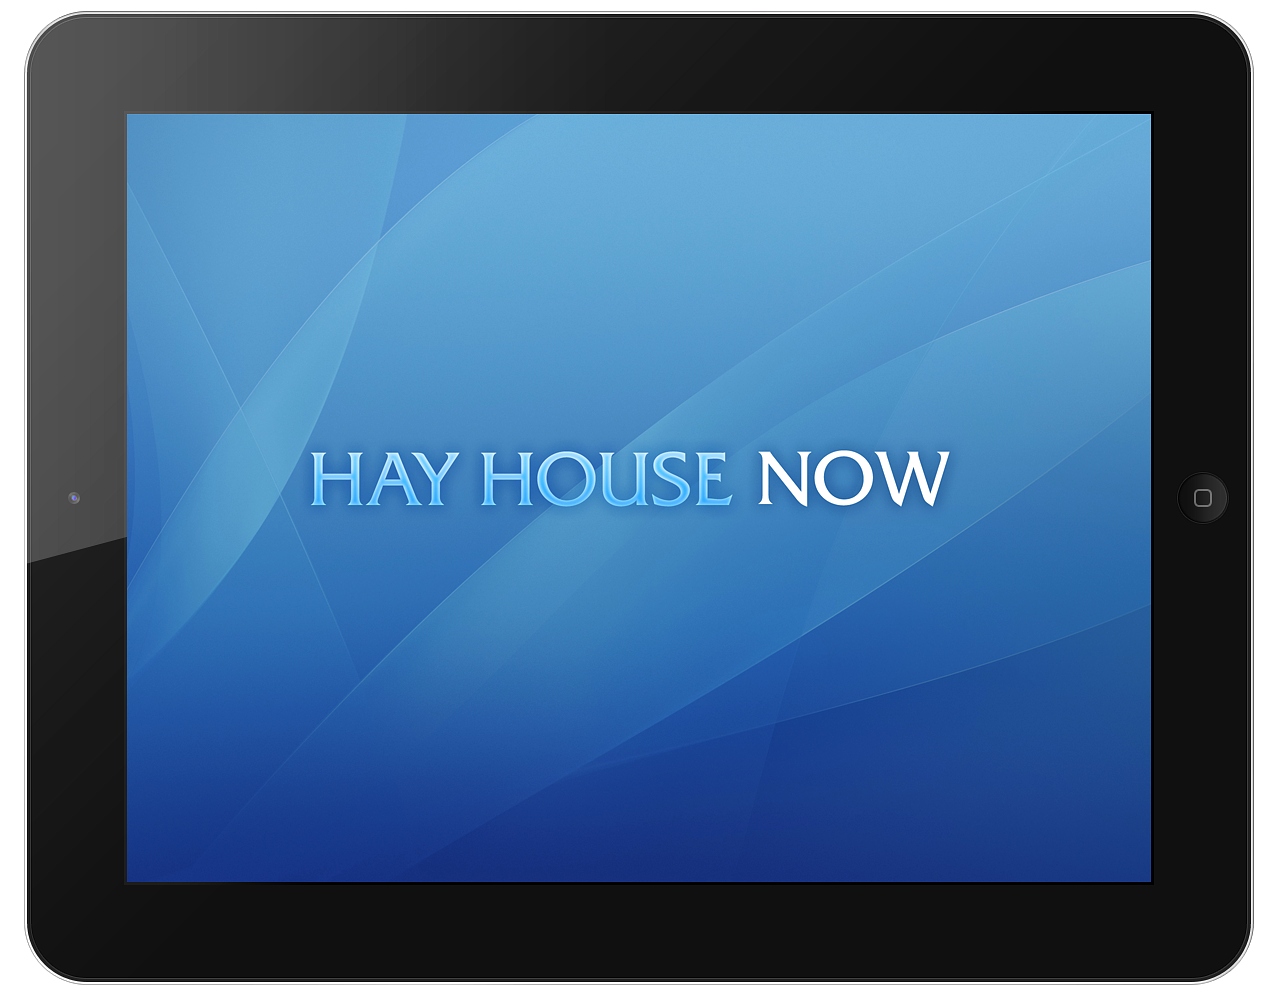 Oceanhouse Media Launches Hay House NOW on the App Store